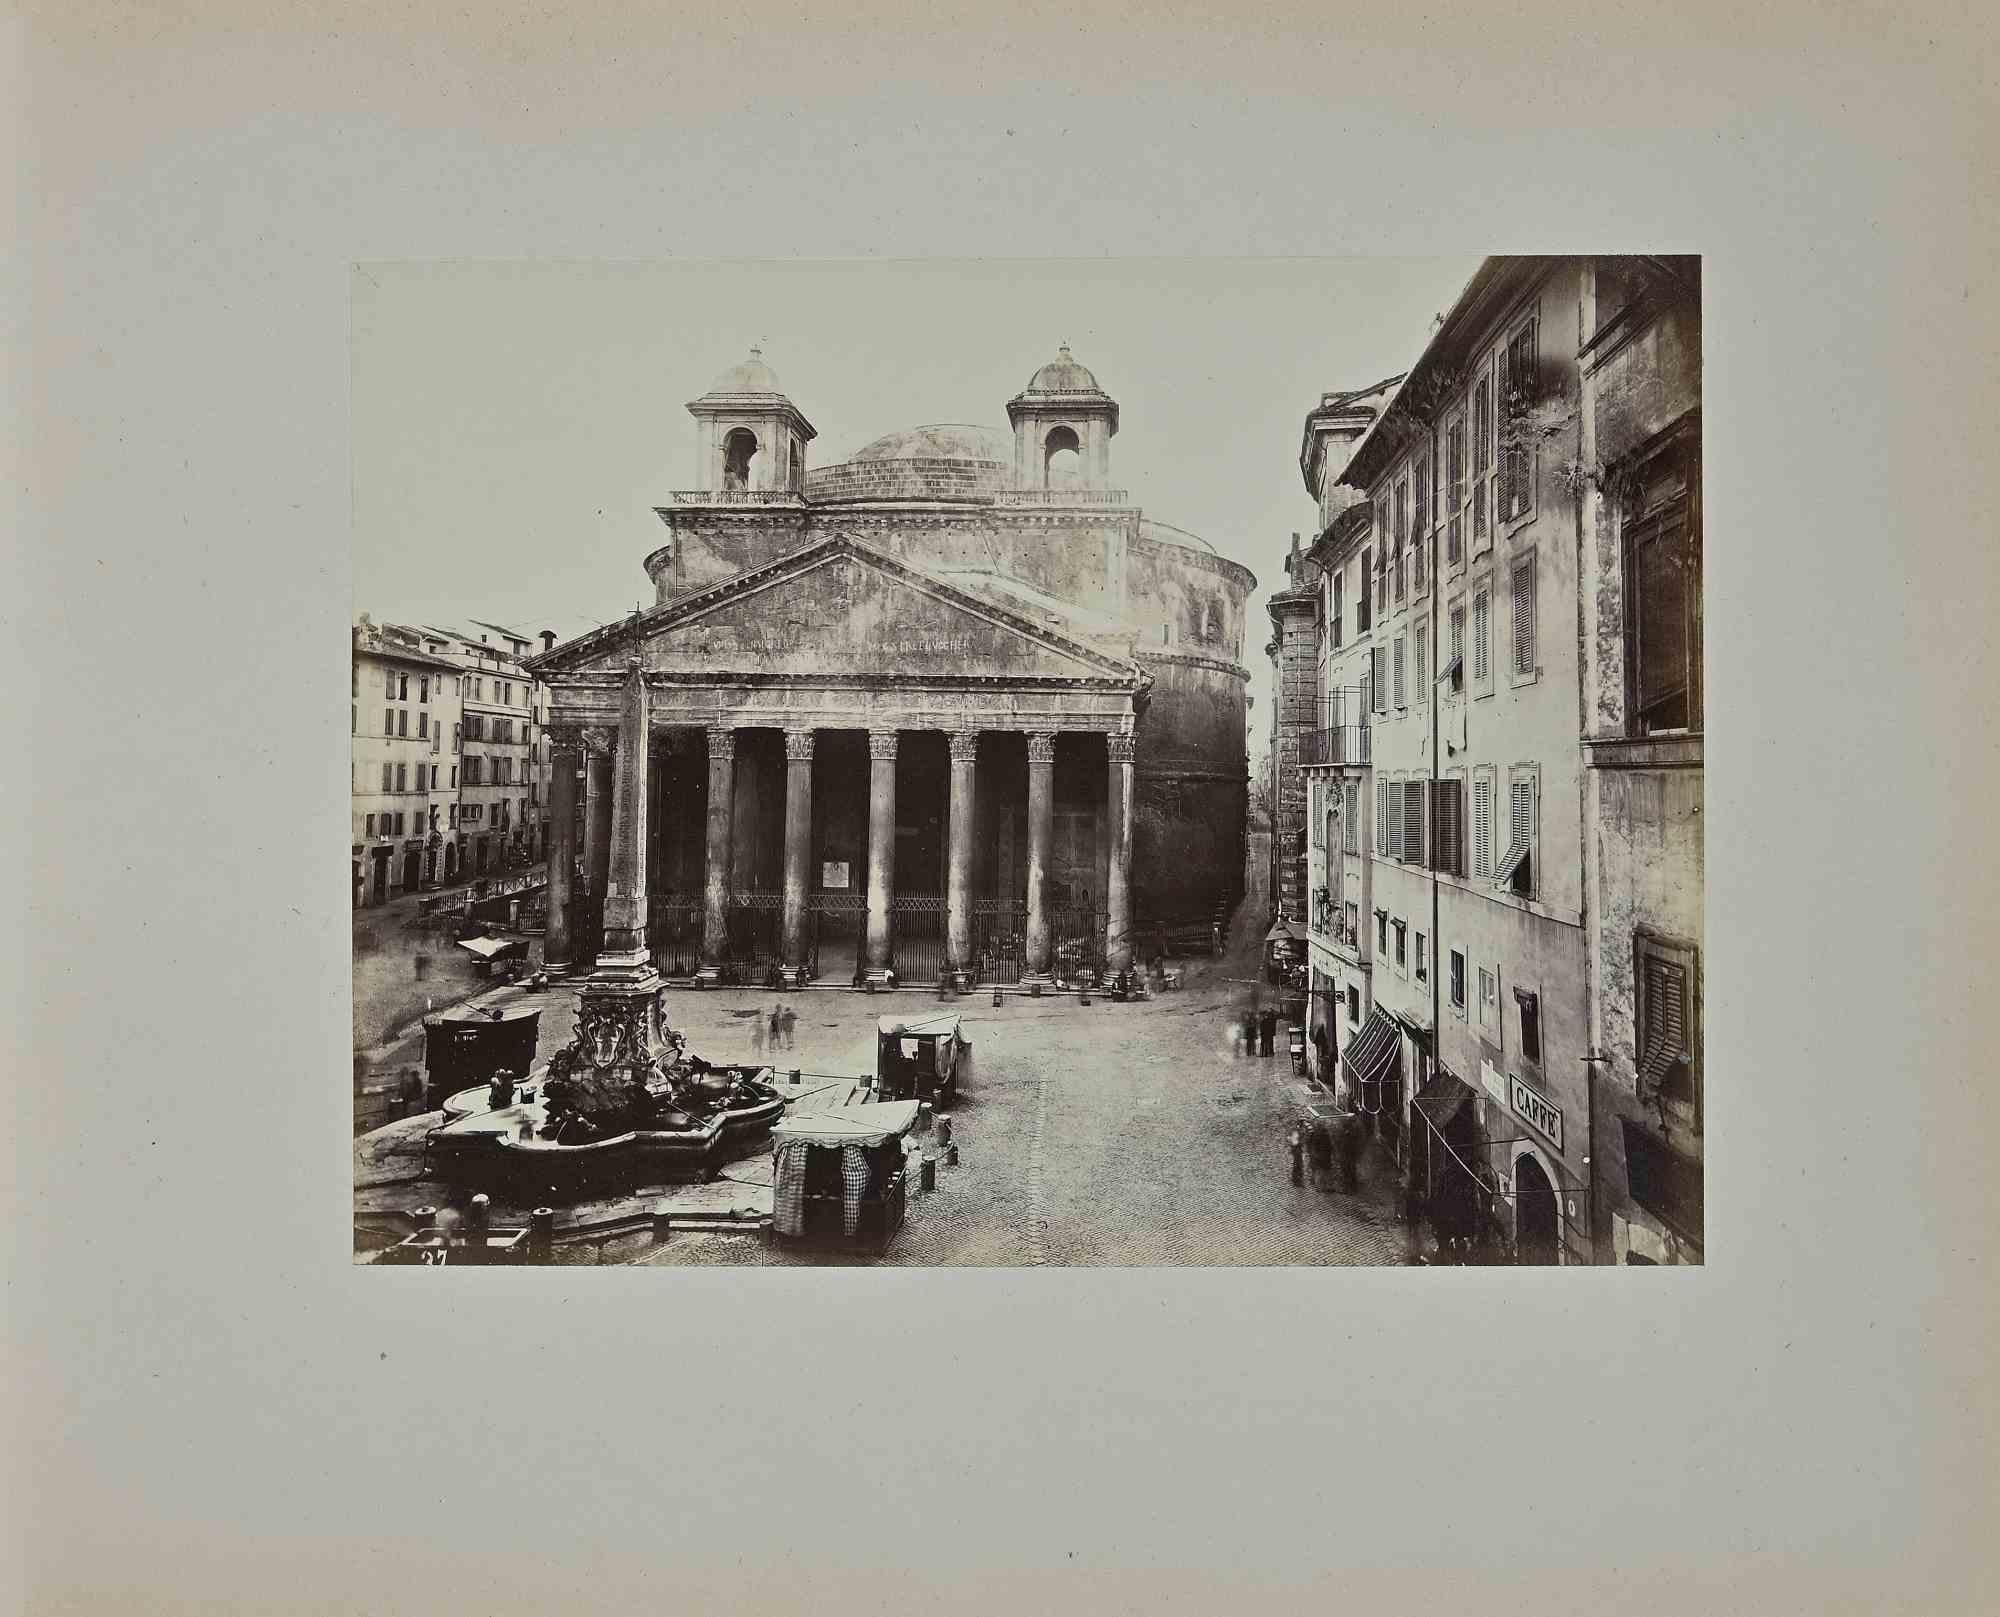 Francesco Sidoli Black and White Photograph -  View of Piazza del Pantheon - Photograph by F. Sidoli - Late 19th Century